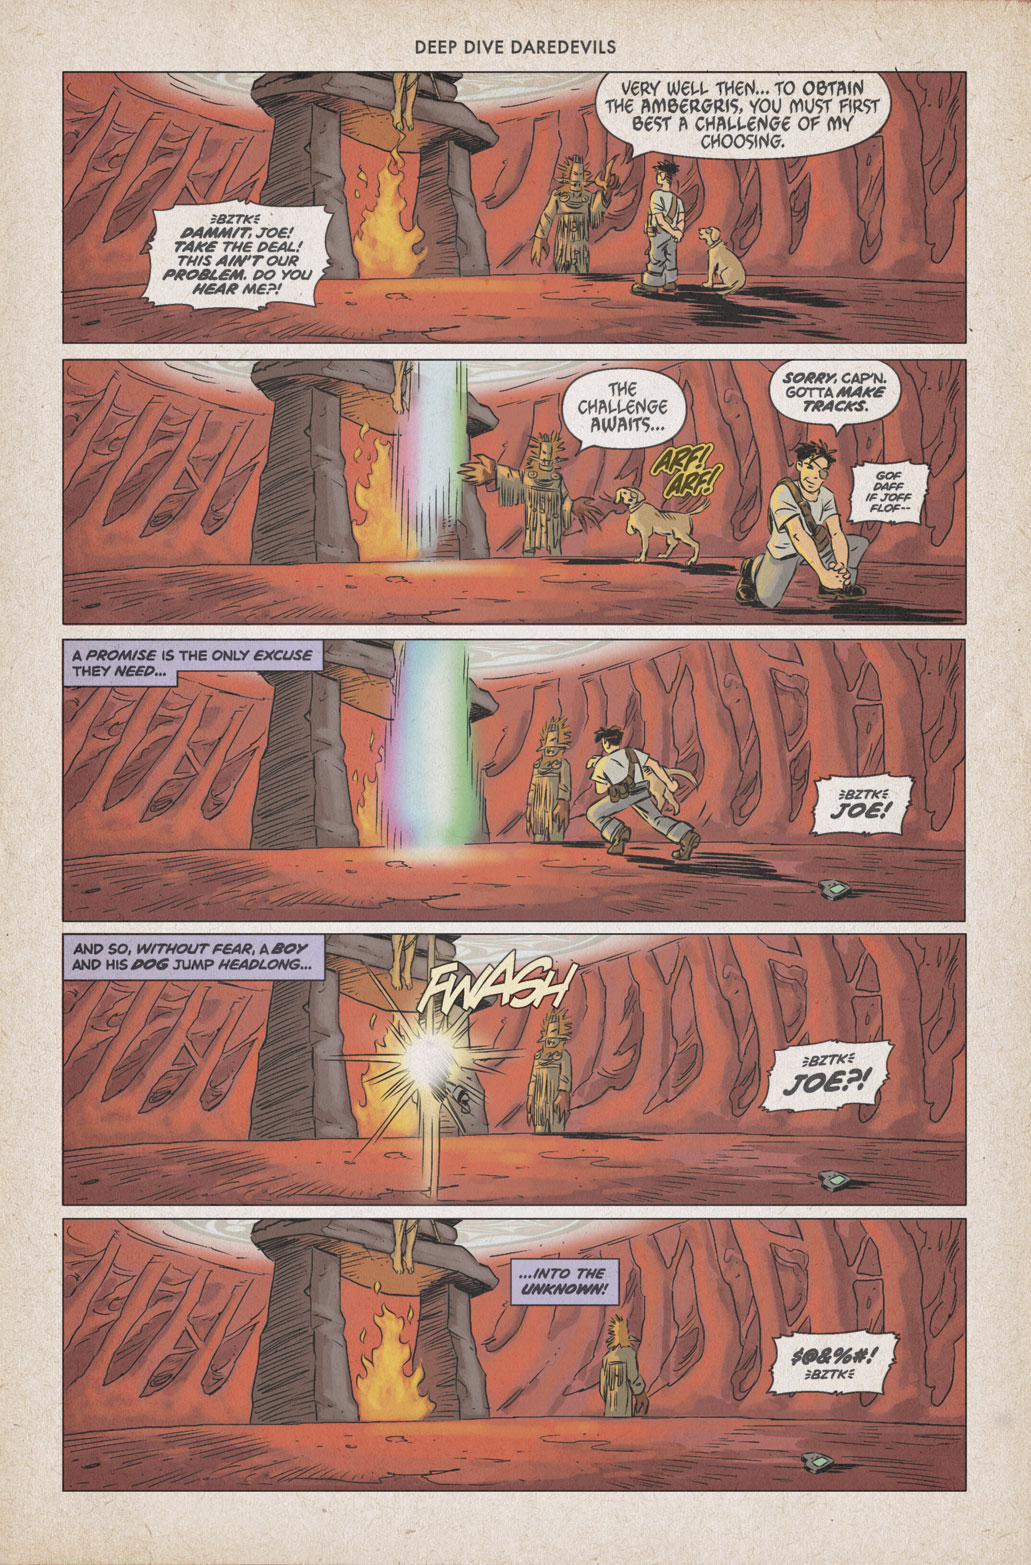 Page 28